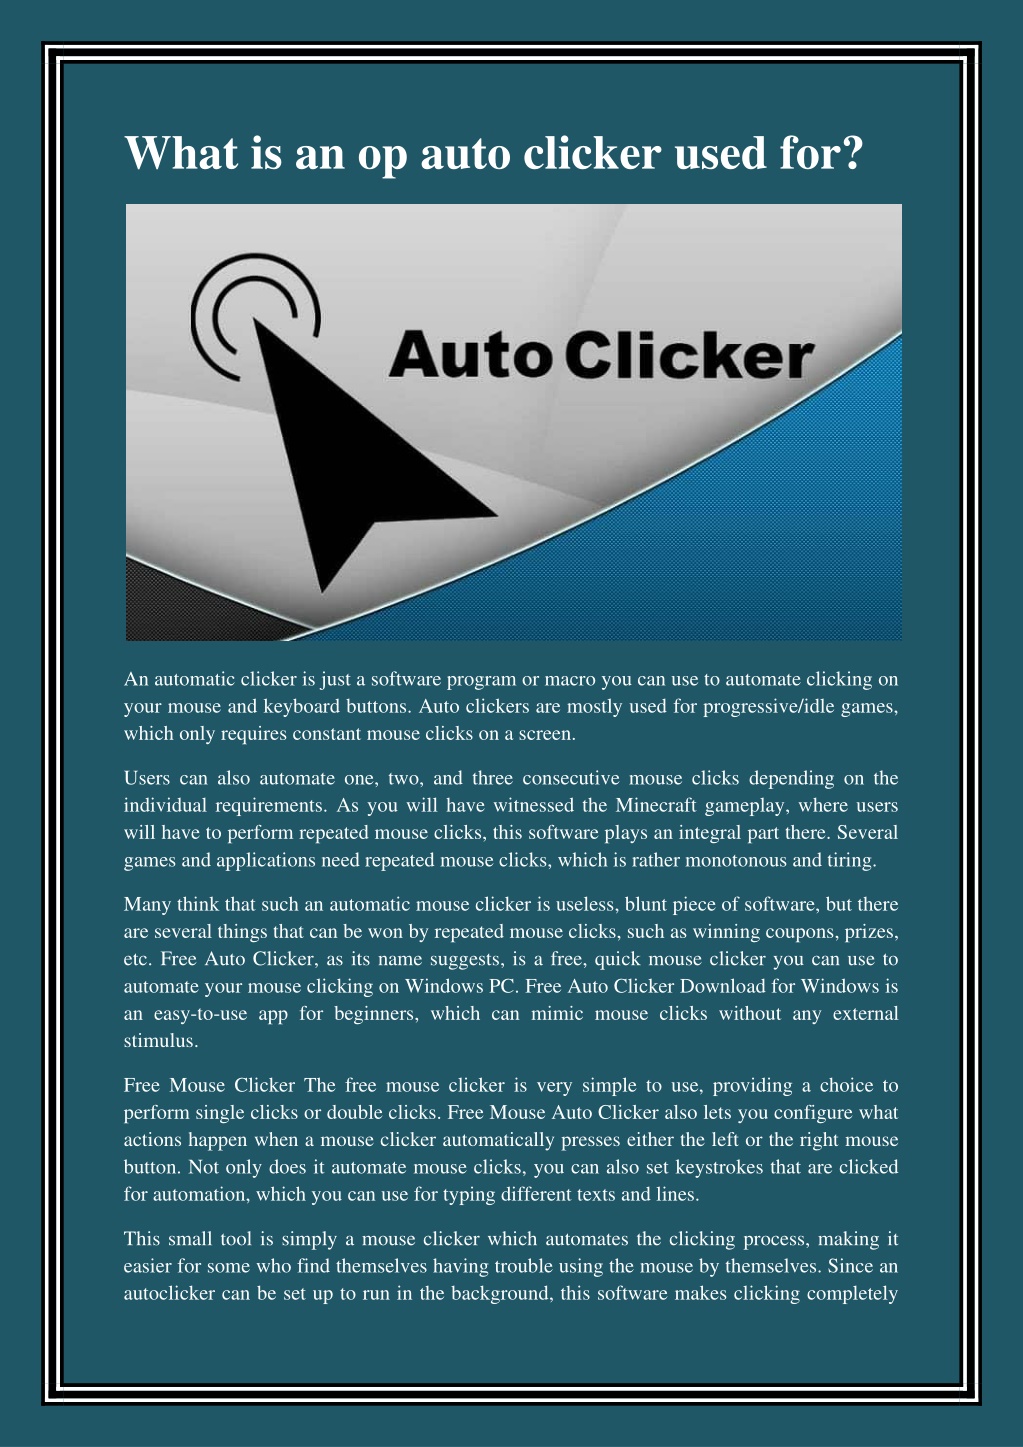 Auto Clicker Typer - Record and play mouse and keyboard actions